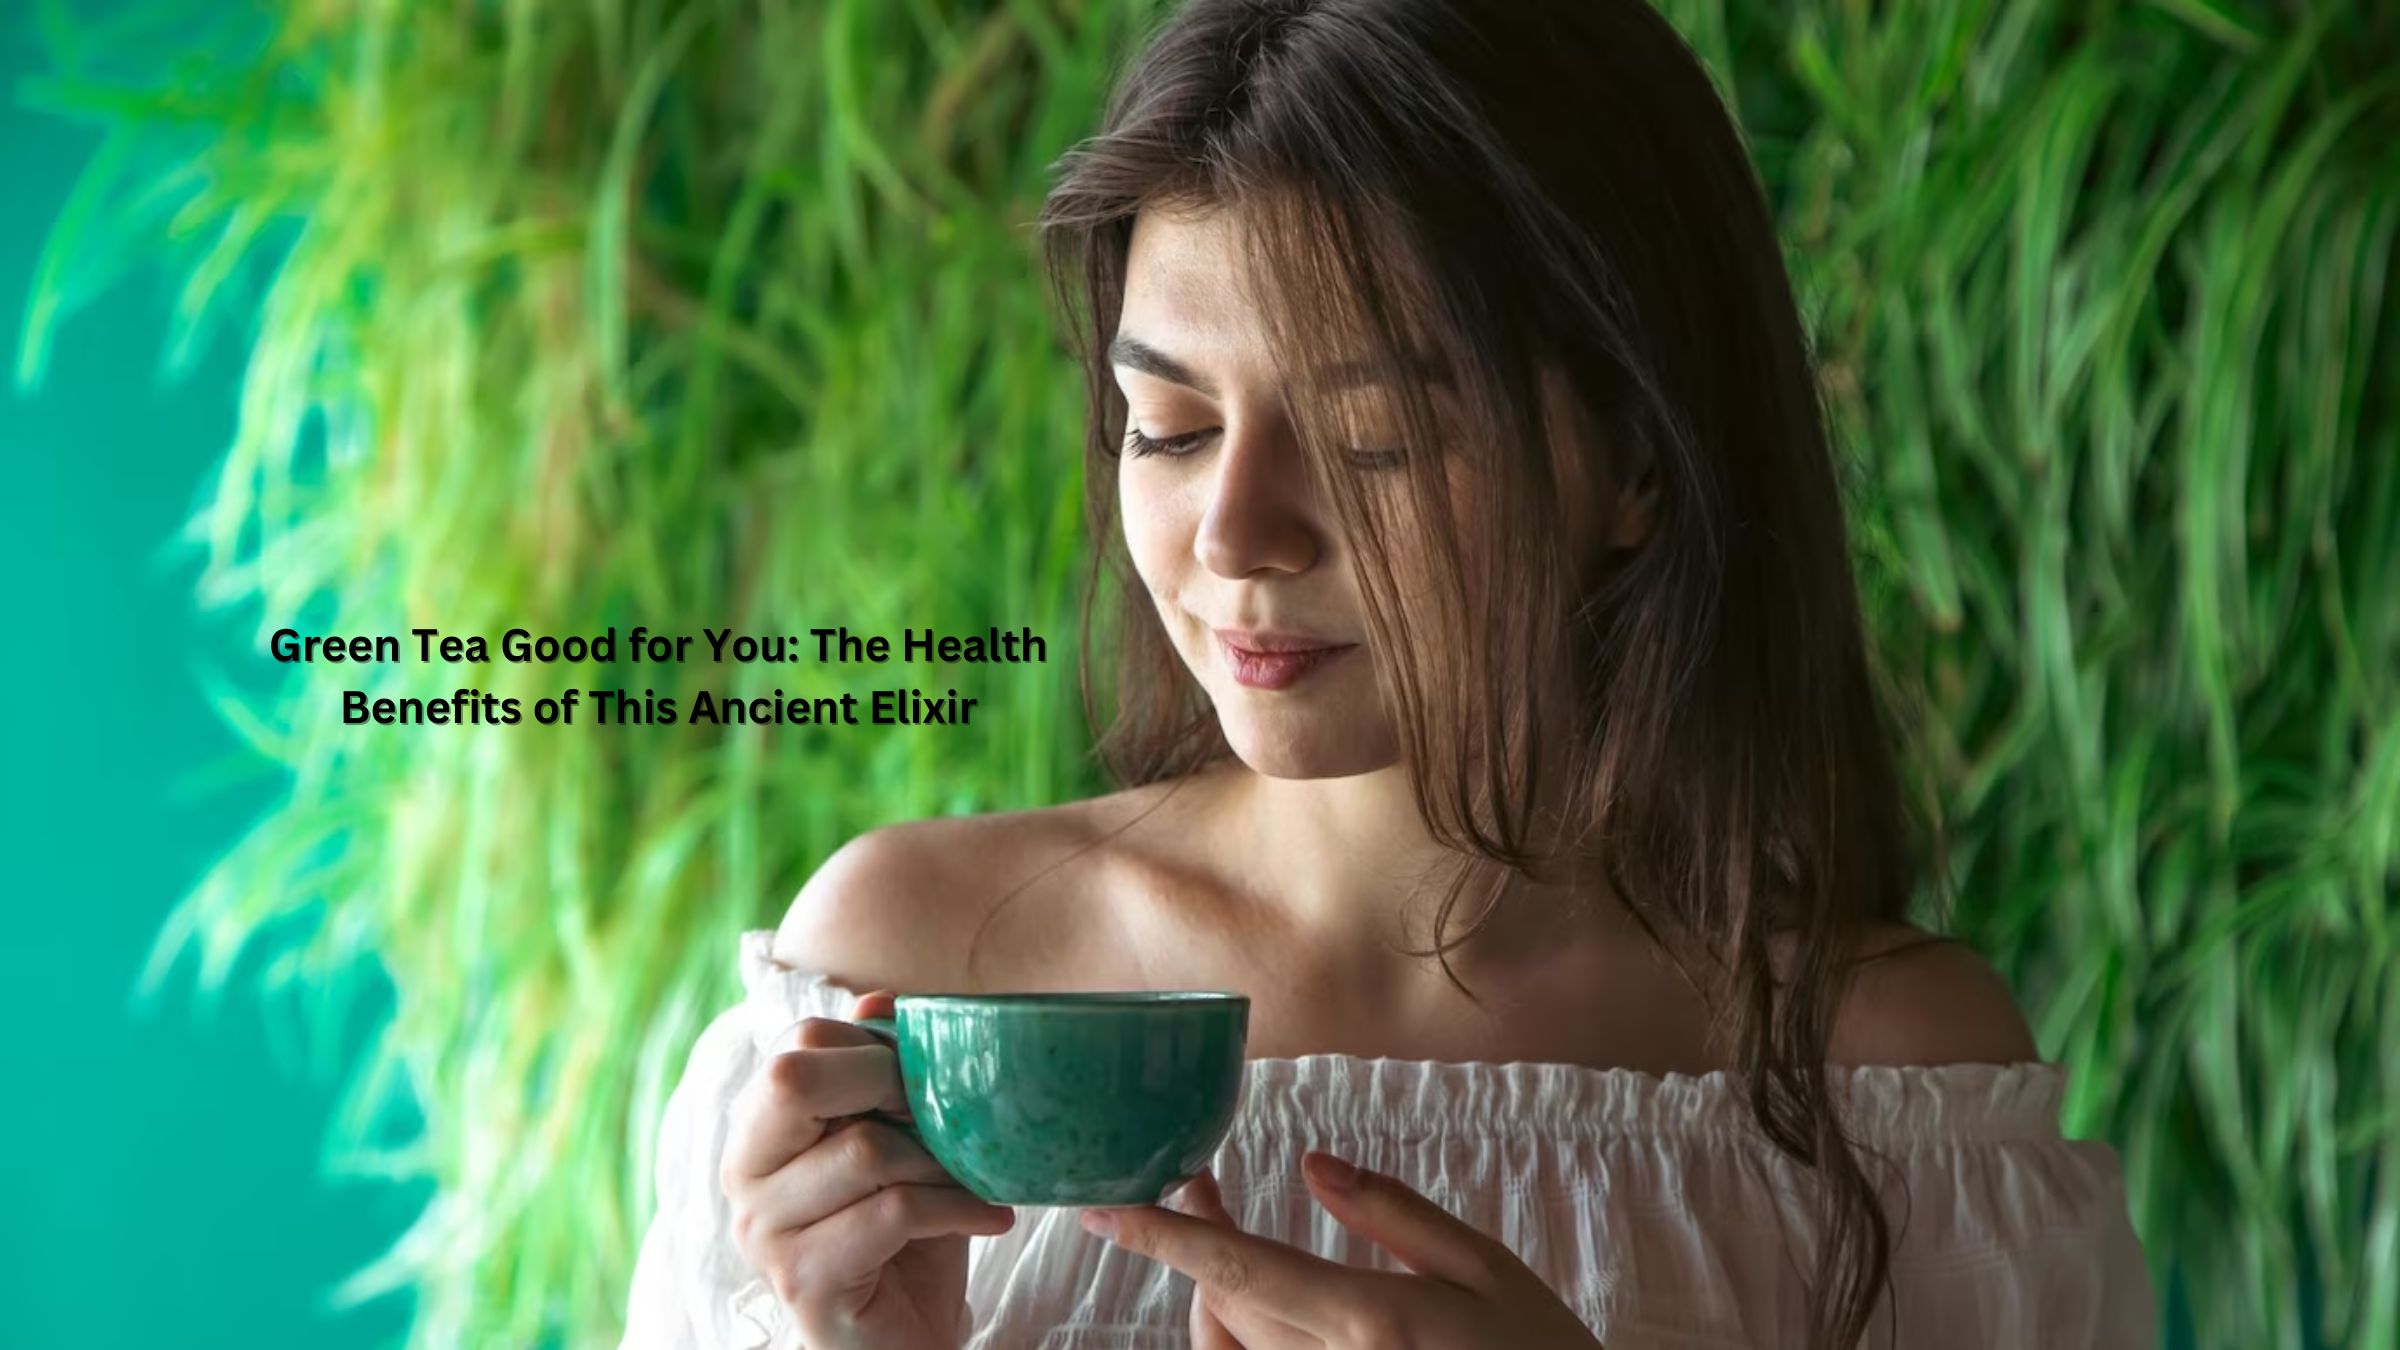 Green Tea Good for You: The Health Benefits of This Ancient Elixir